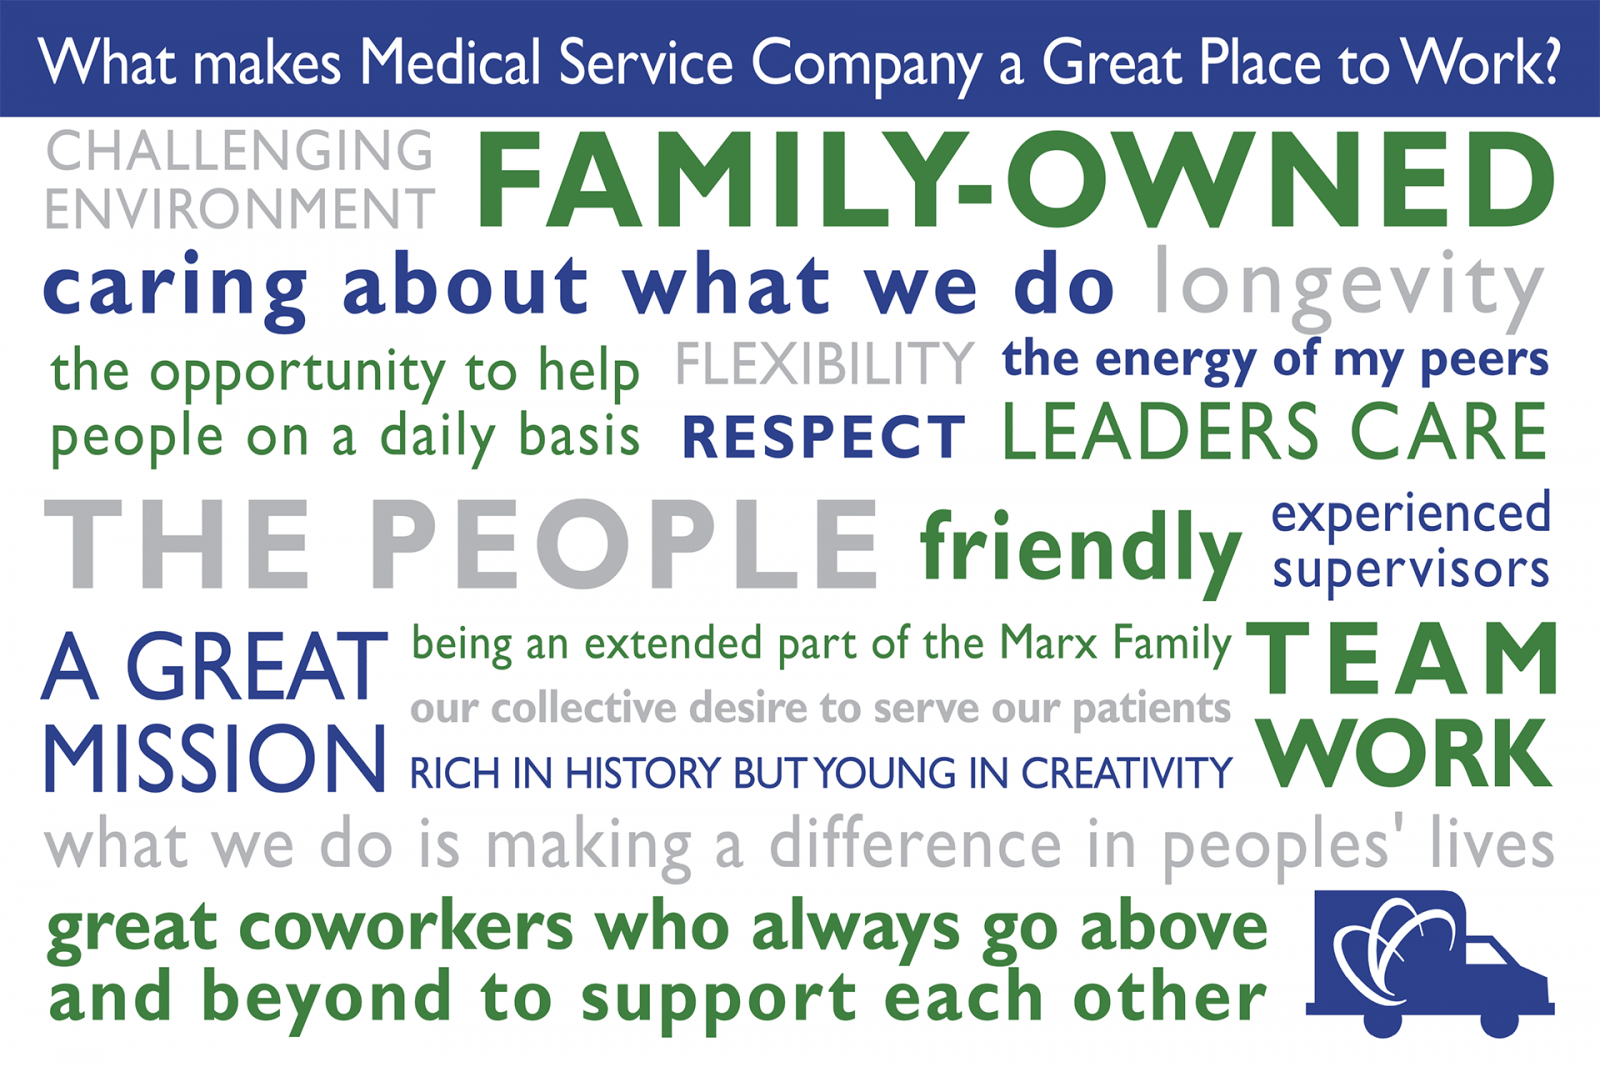 testimonials of MSC employees and why they think MSC is a great company to work at